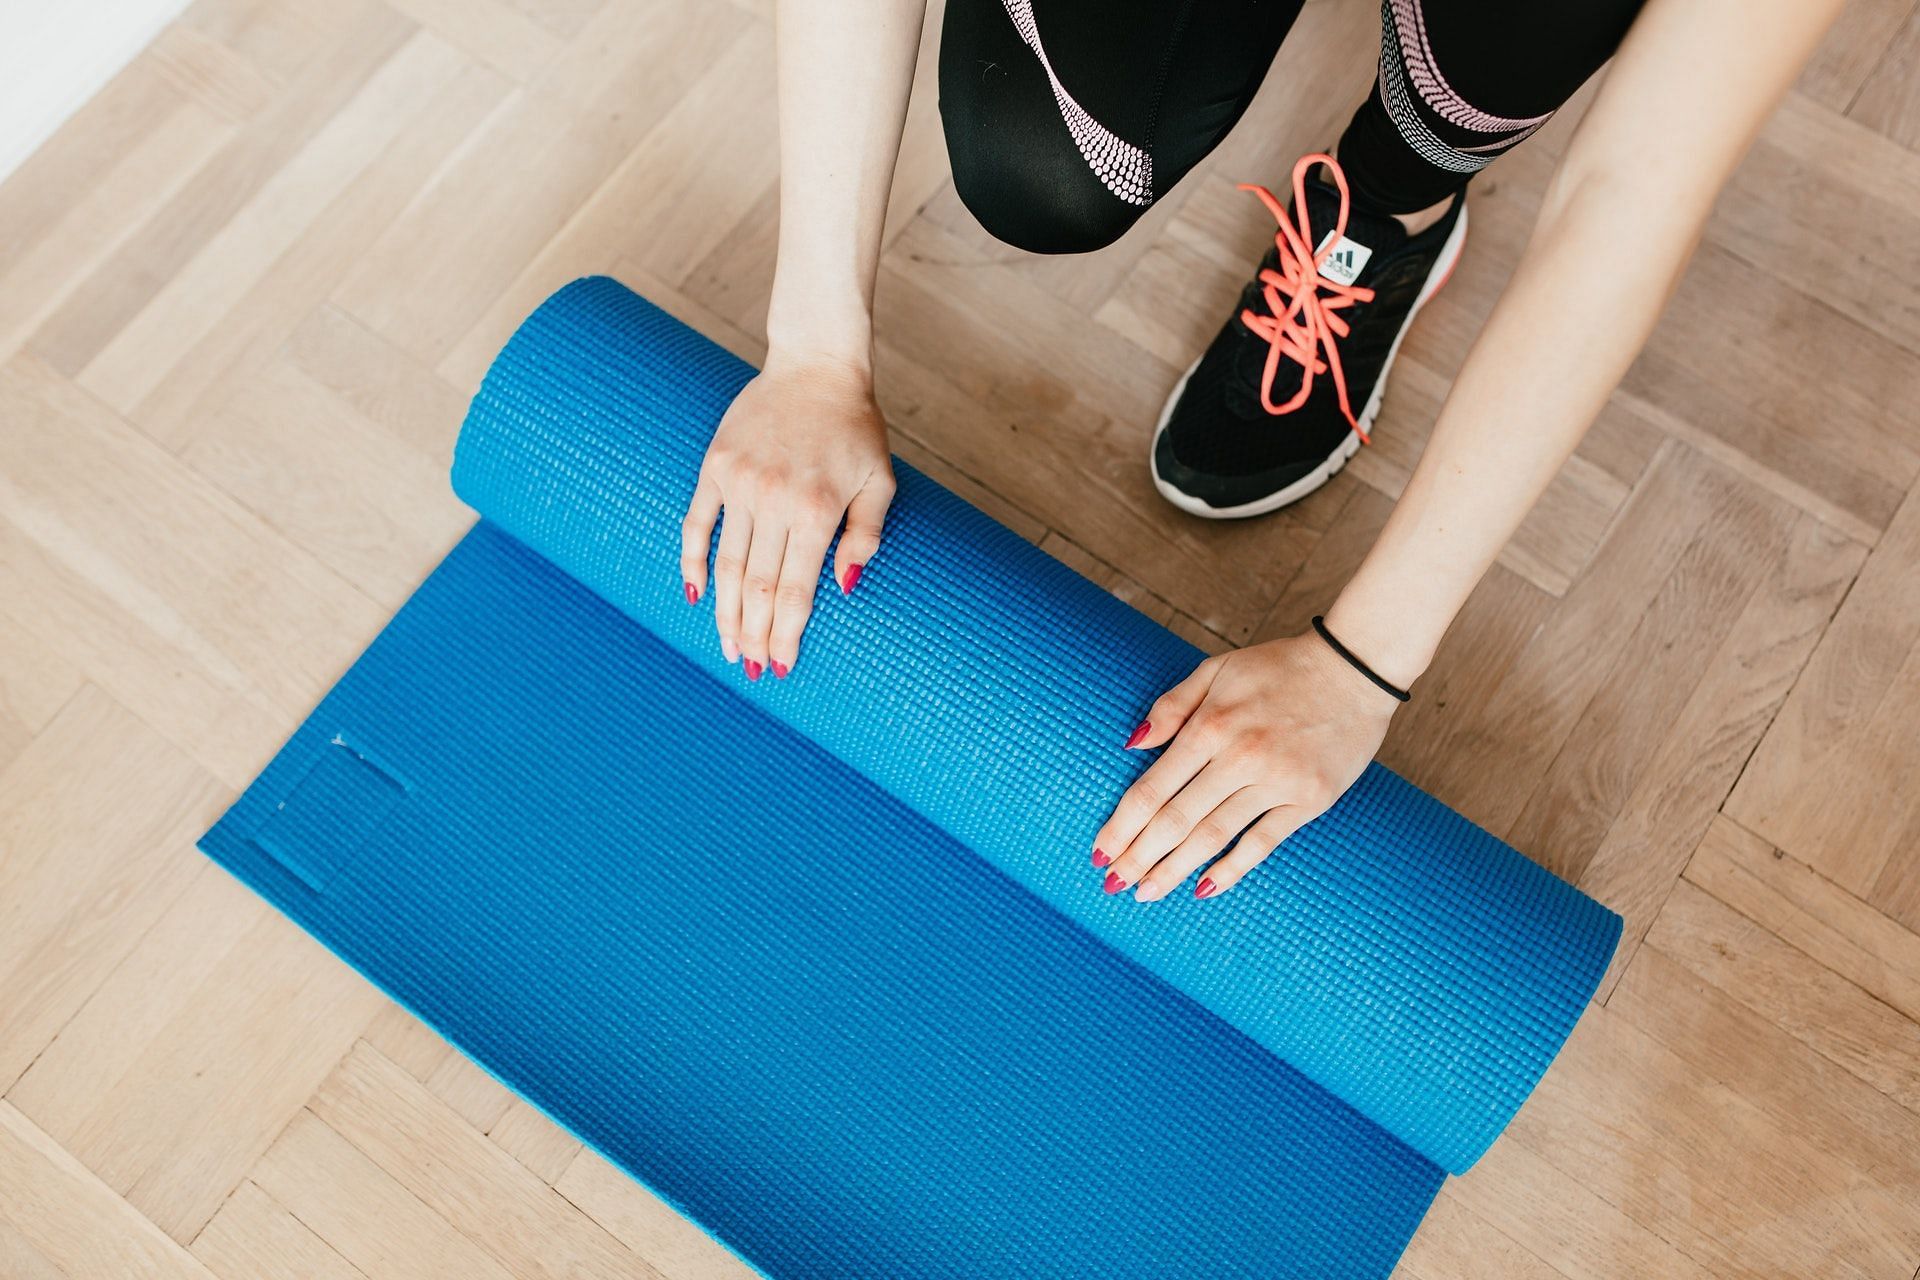 Double leg lift is a classic Pilates exercise for the abdominal muscles. (Photo by Karolina Grabowska via pexels)